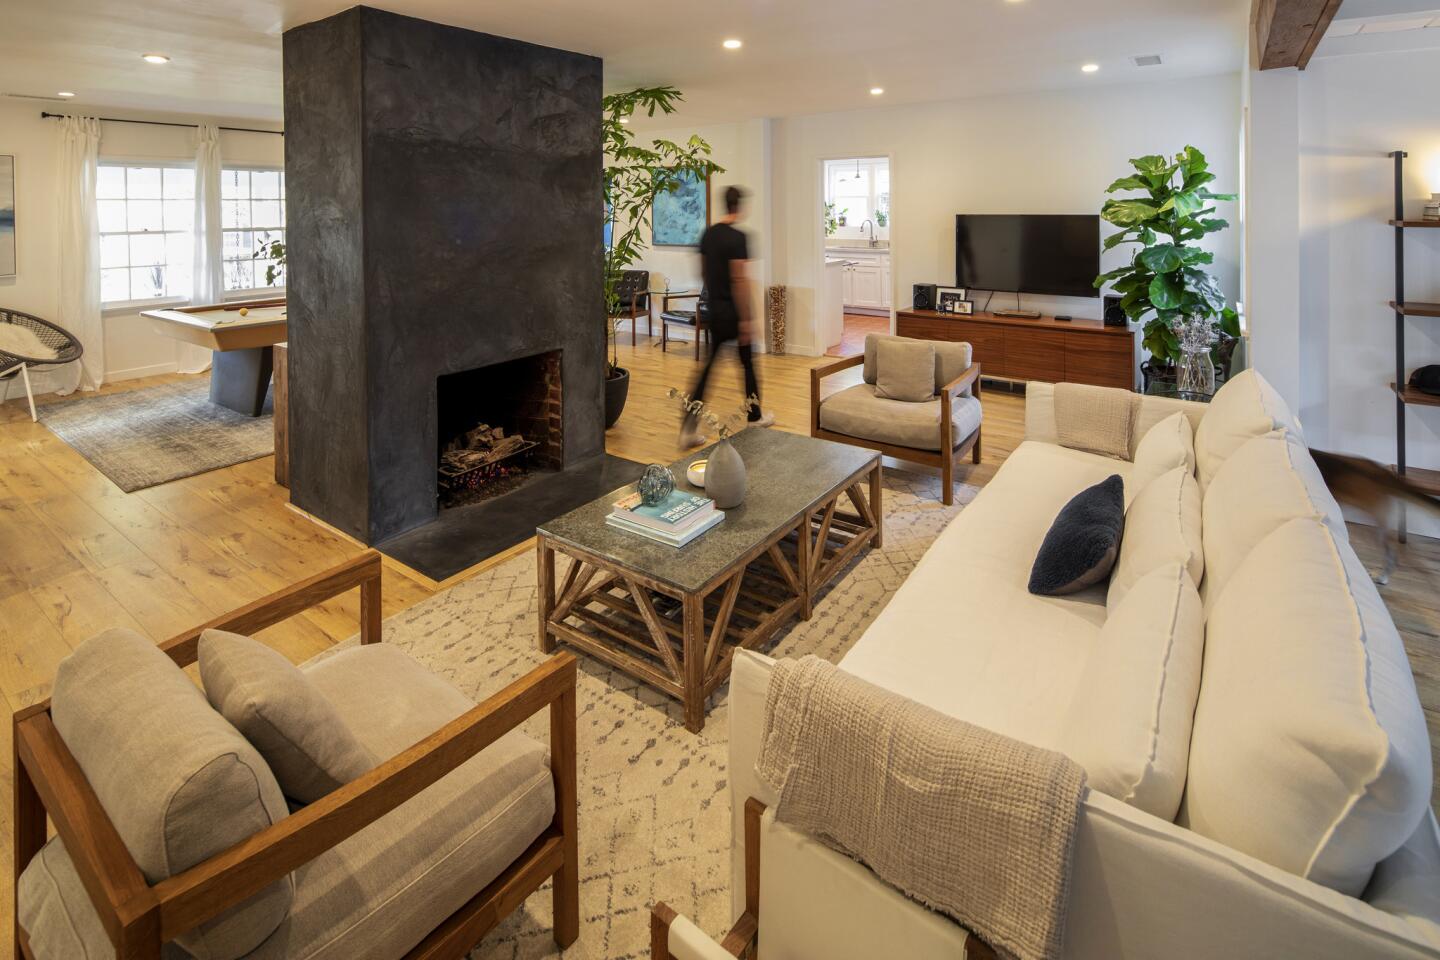 To give the interiors a more modern feel, Leiaghat removed the wall between the living room and den and covered the existing red brick fireplace with gray stucco.